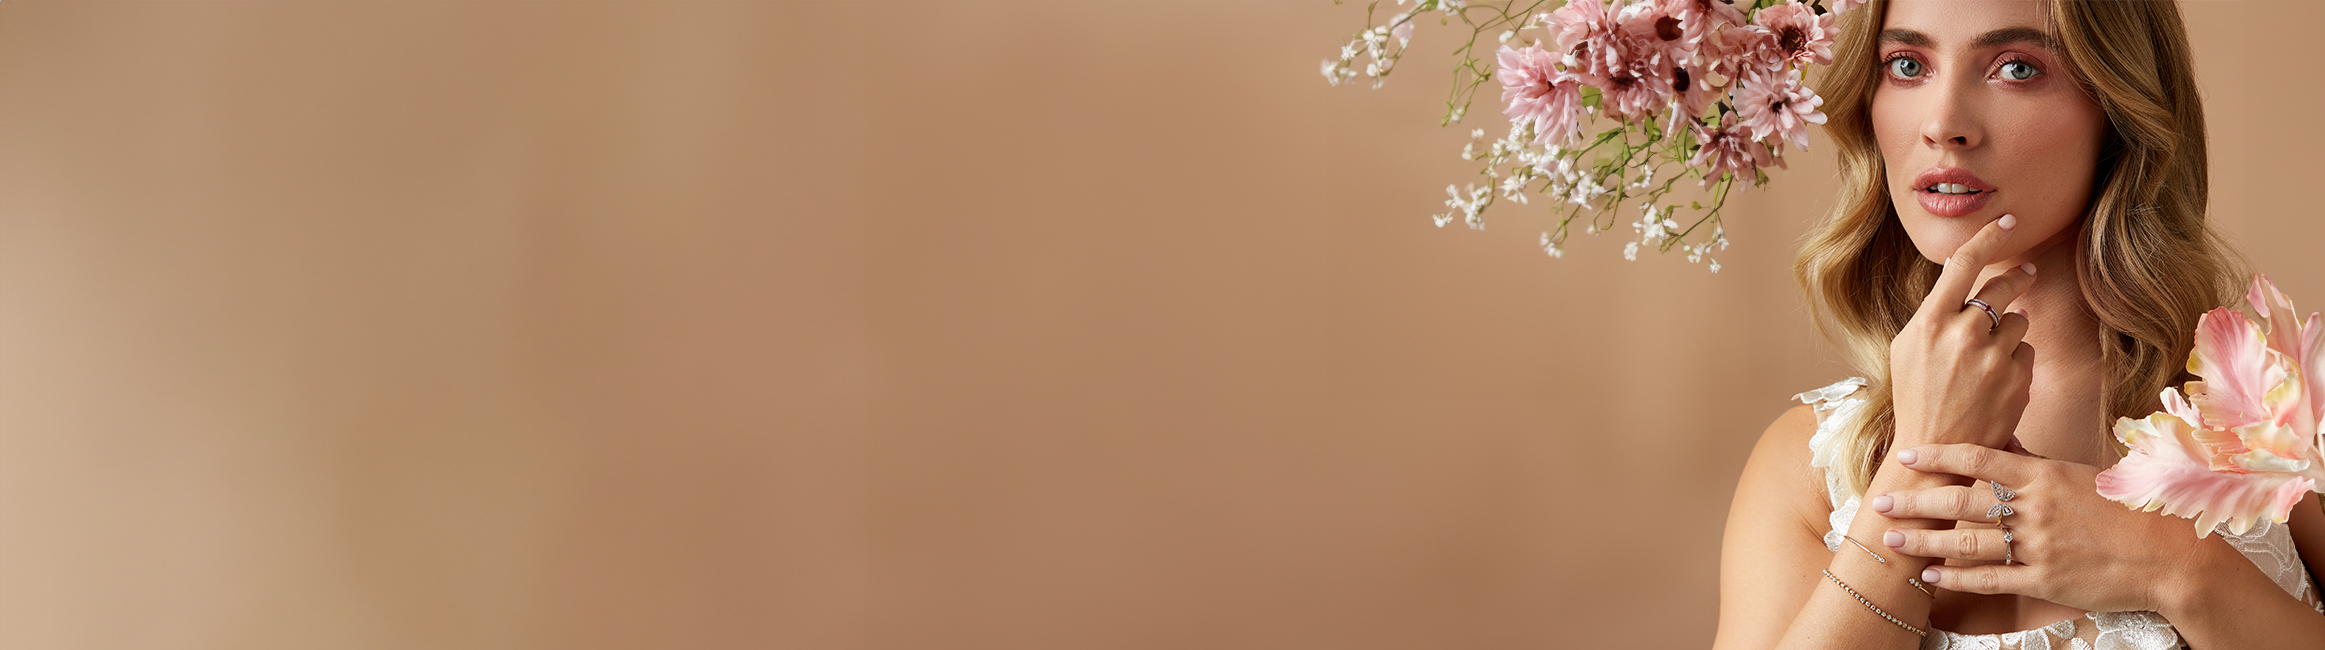 blossoming_banner_2350x650_73d457f1-8992-4e69-bf19-72b985f81ca5.png